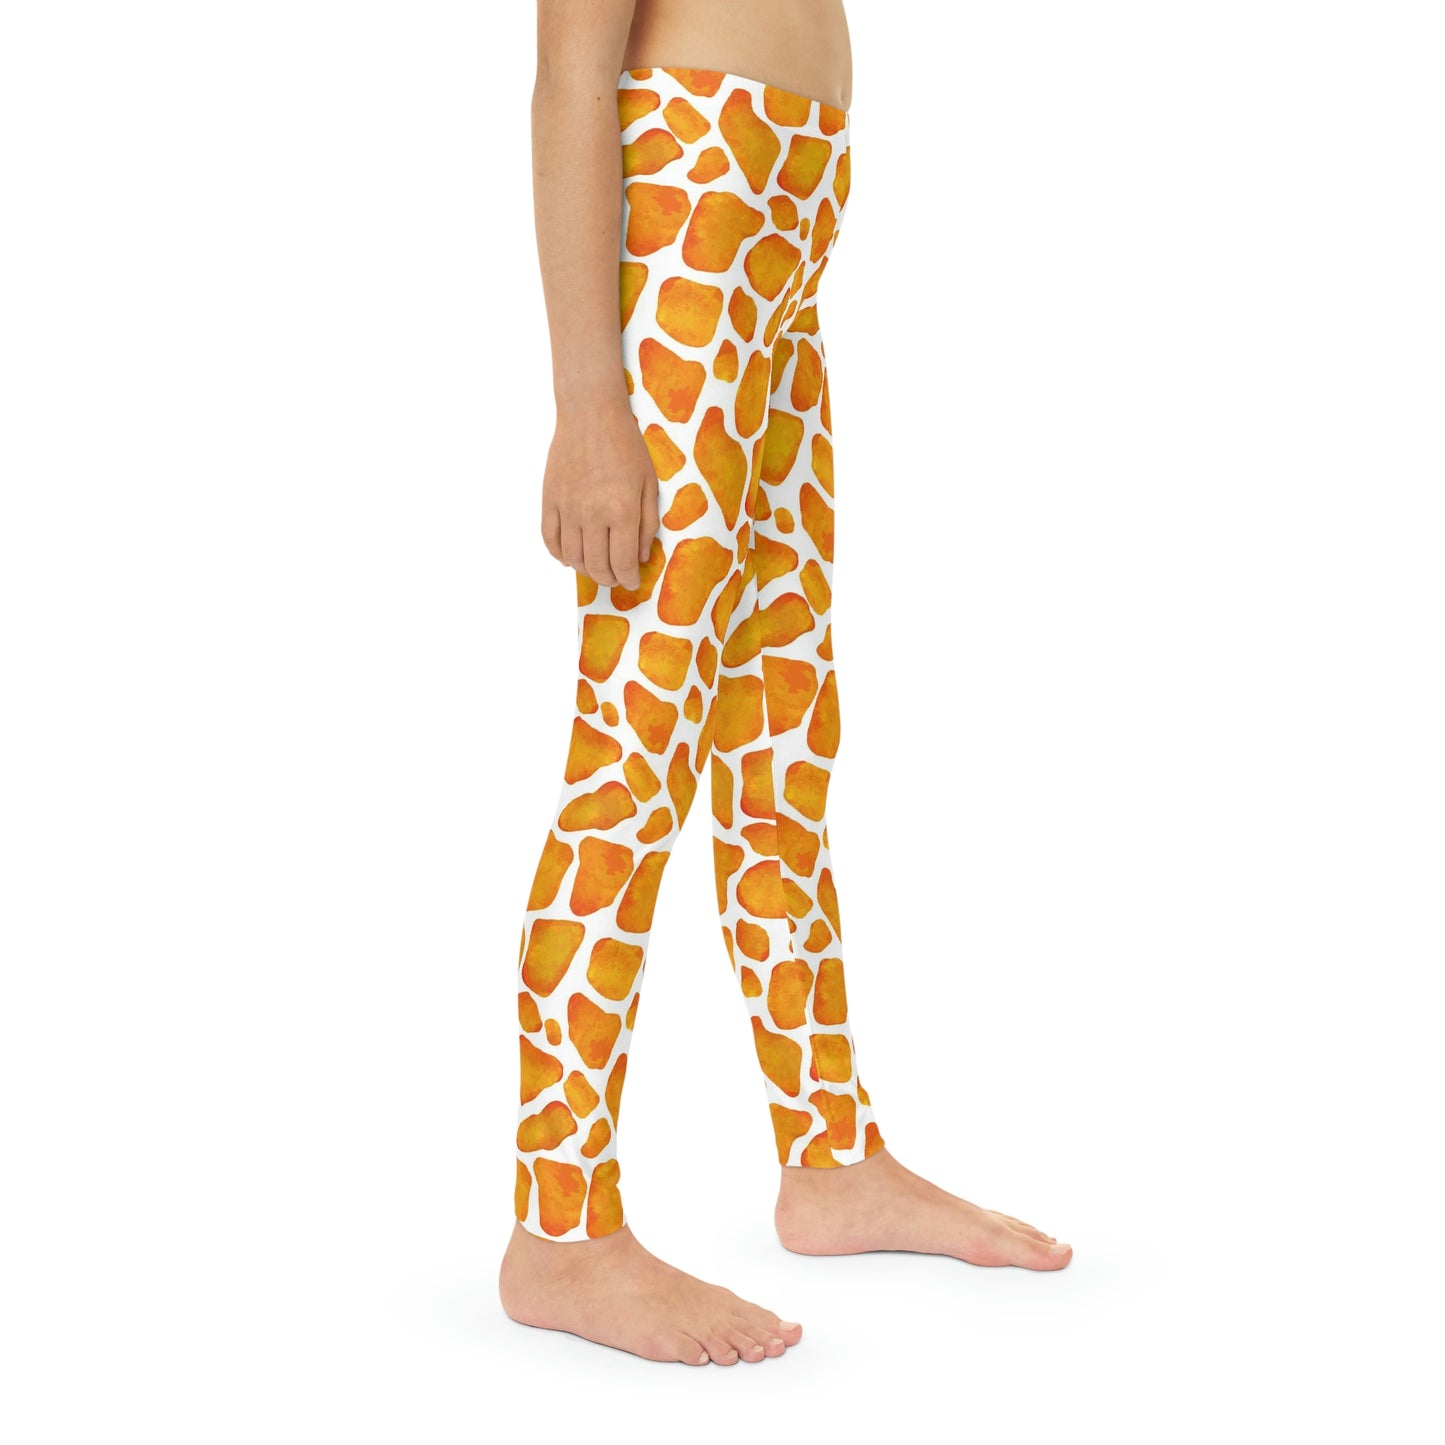 Giraffe animal kingdom, Safari Youth Leggings,  One of a Kind Gift - Unique Workout Activewear tights for kids, Daughter, Niece  Christmas Gift